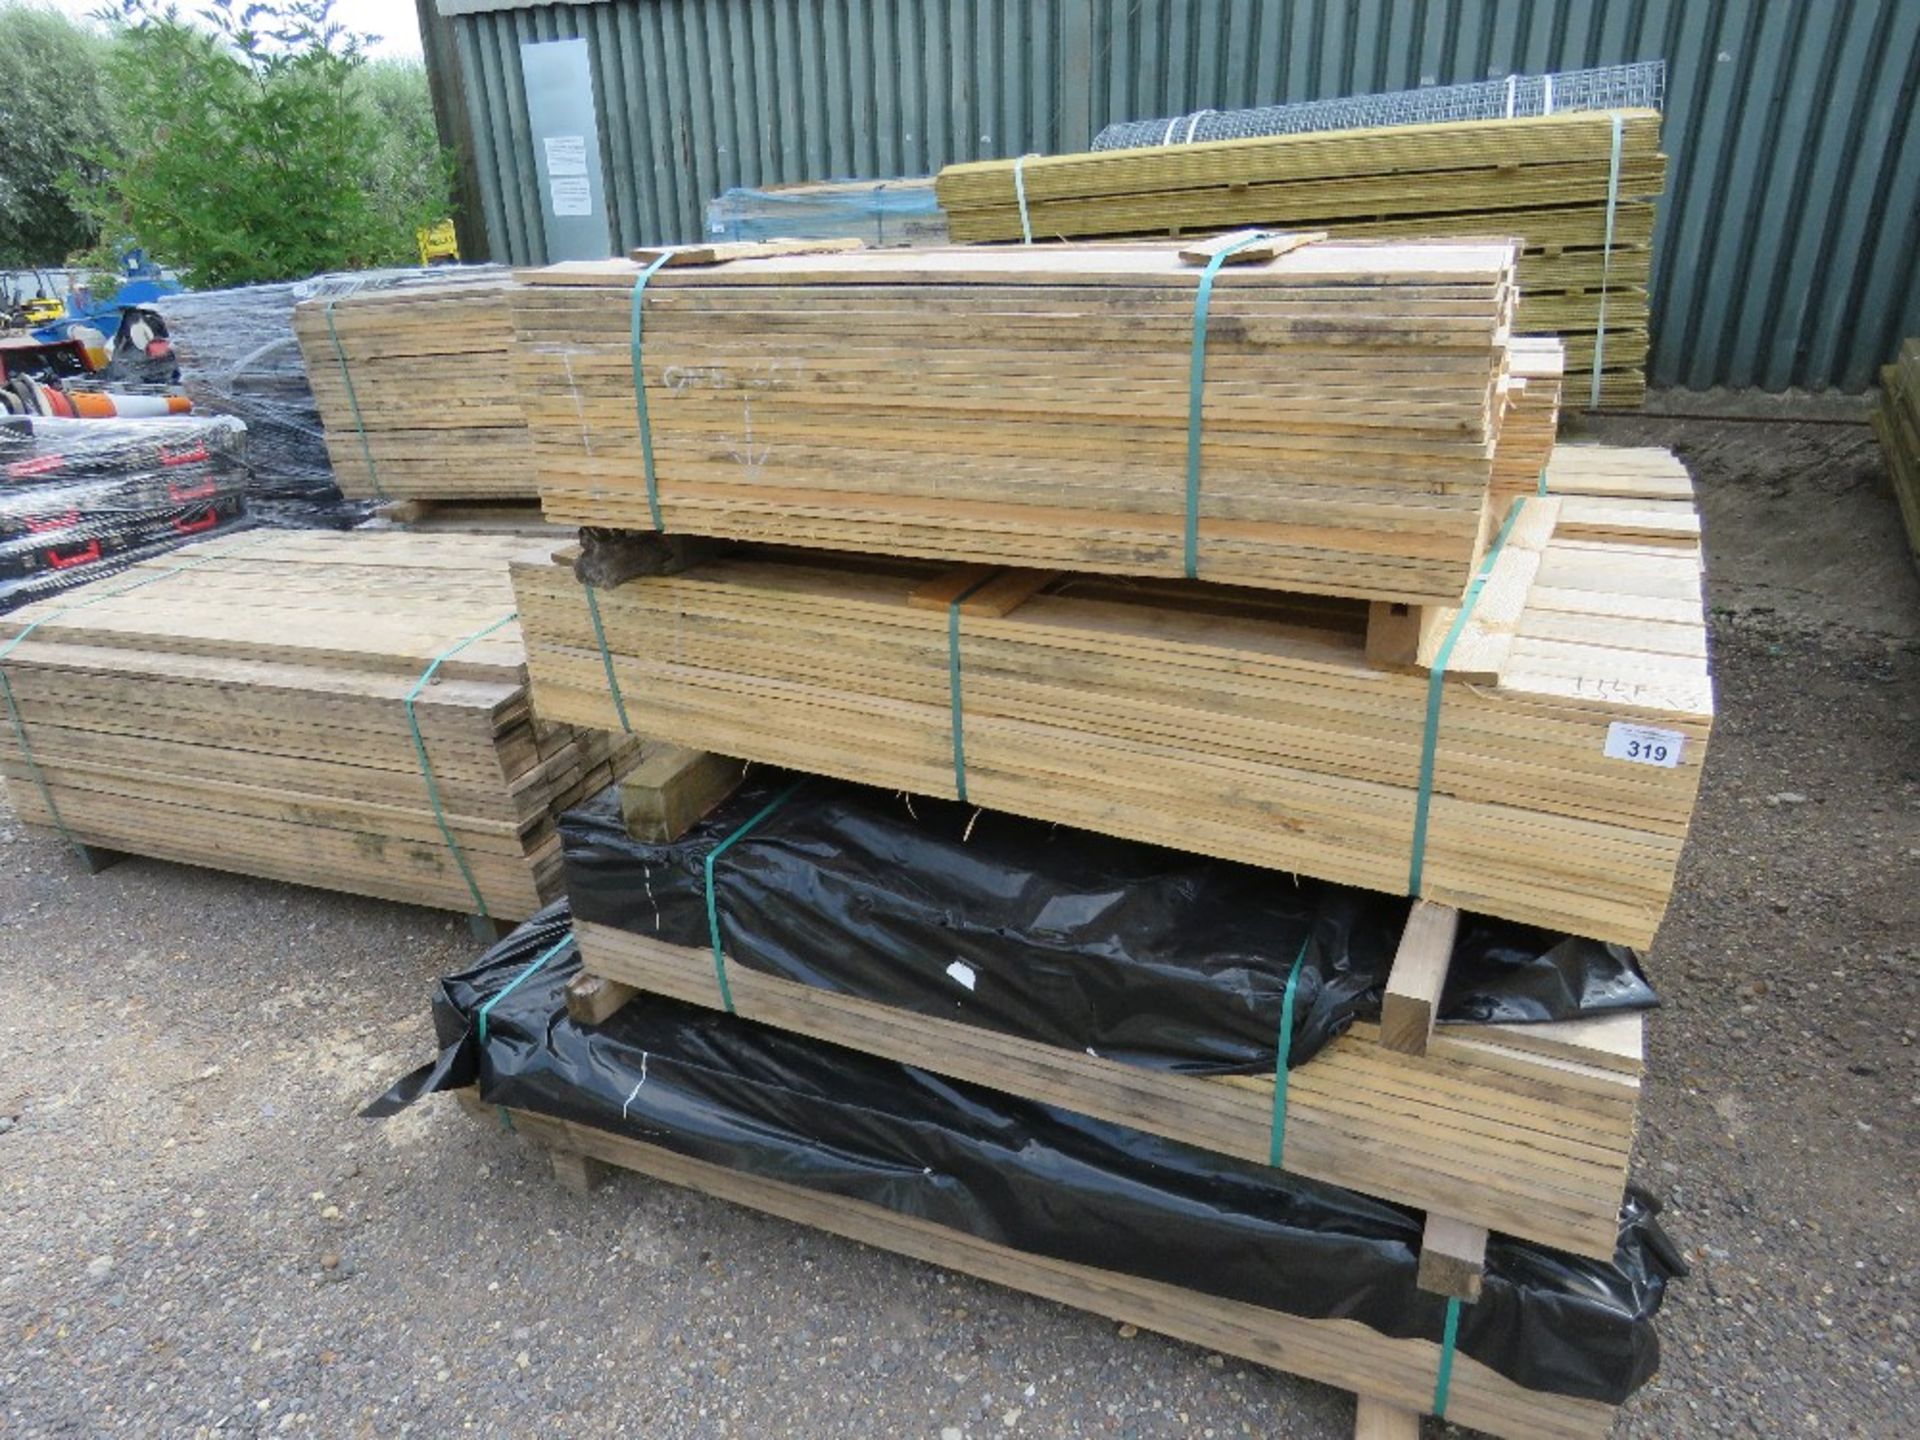 STACK CONTAINING 4 BUNDLES OF UNTREATED FENCE CLADDING TIMBER BOARDS, 1.14M -1.73M LENGTHAPPROX. - Image 6 of 6